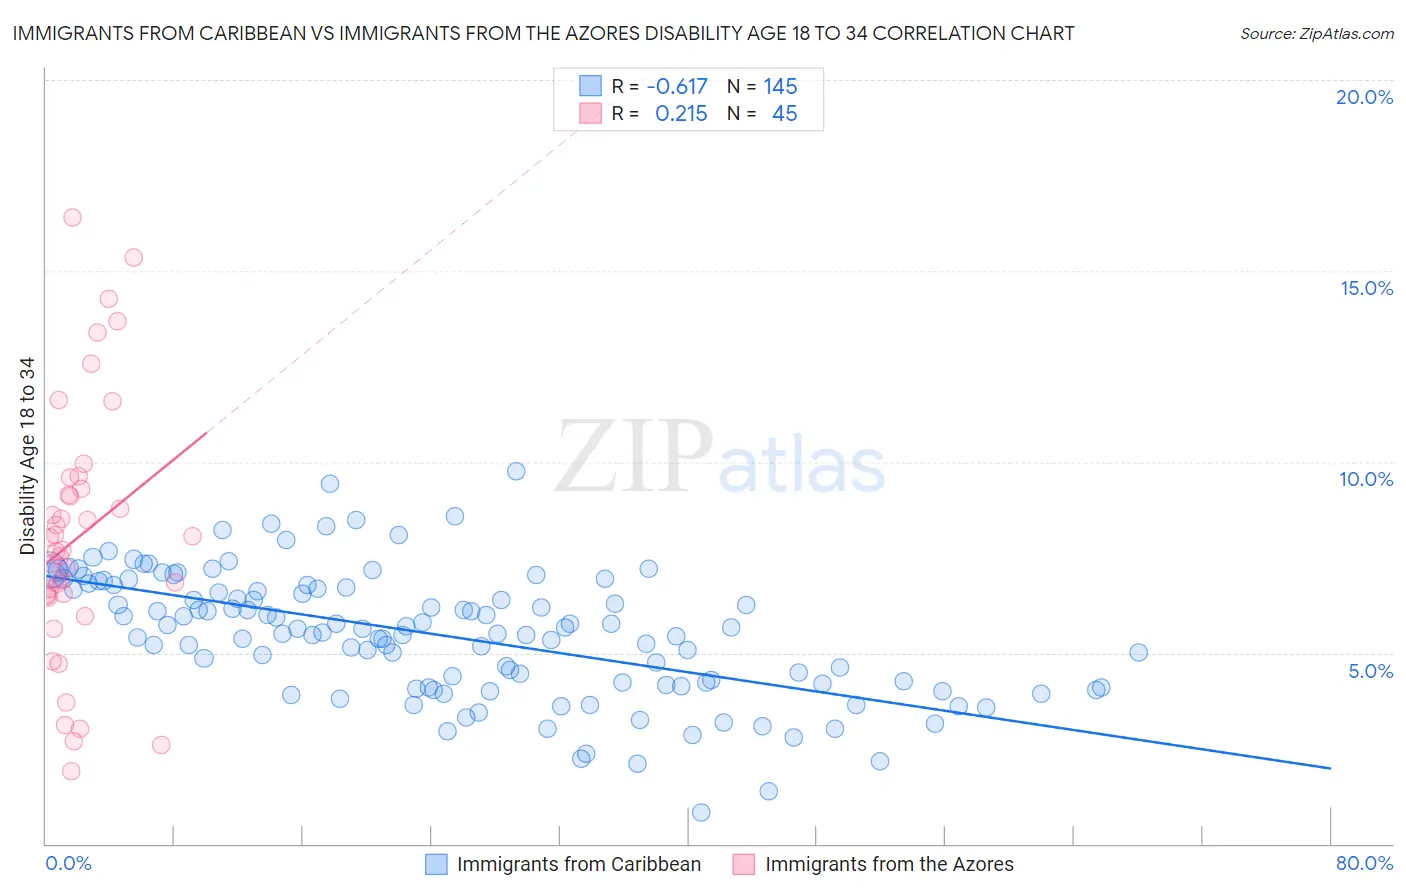 Immigrants from Caribbean vs Immigrants from the Azores Disability Age 18 to 34